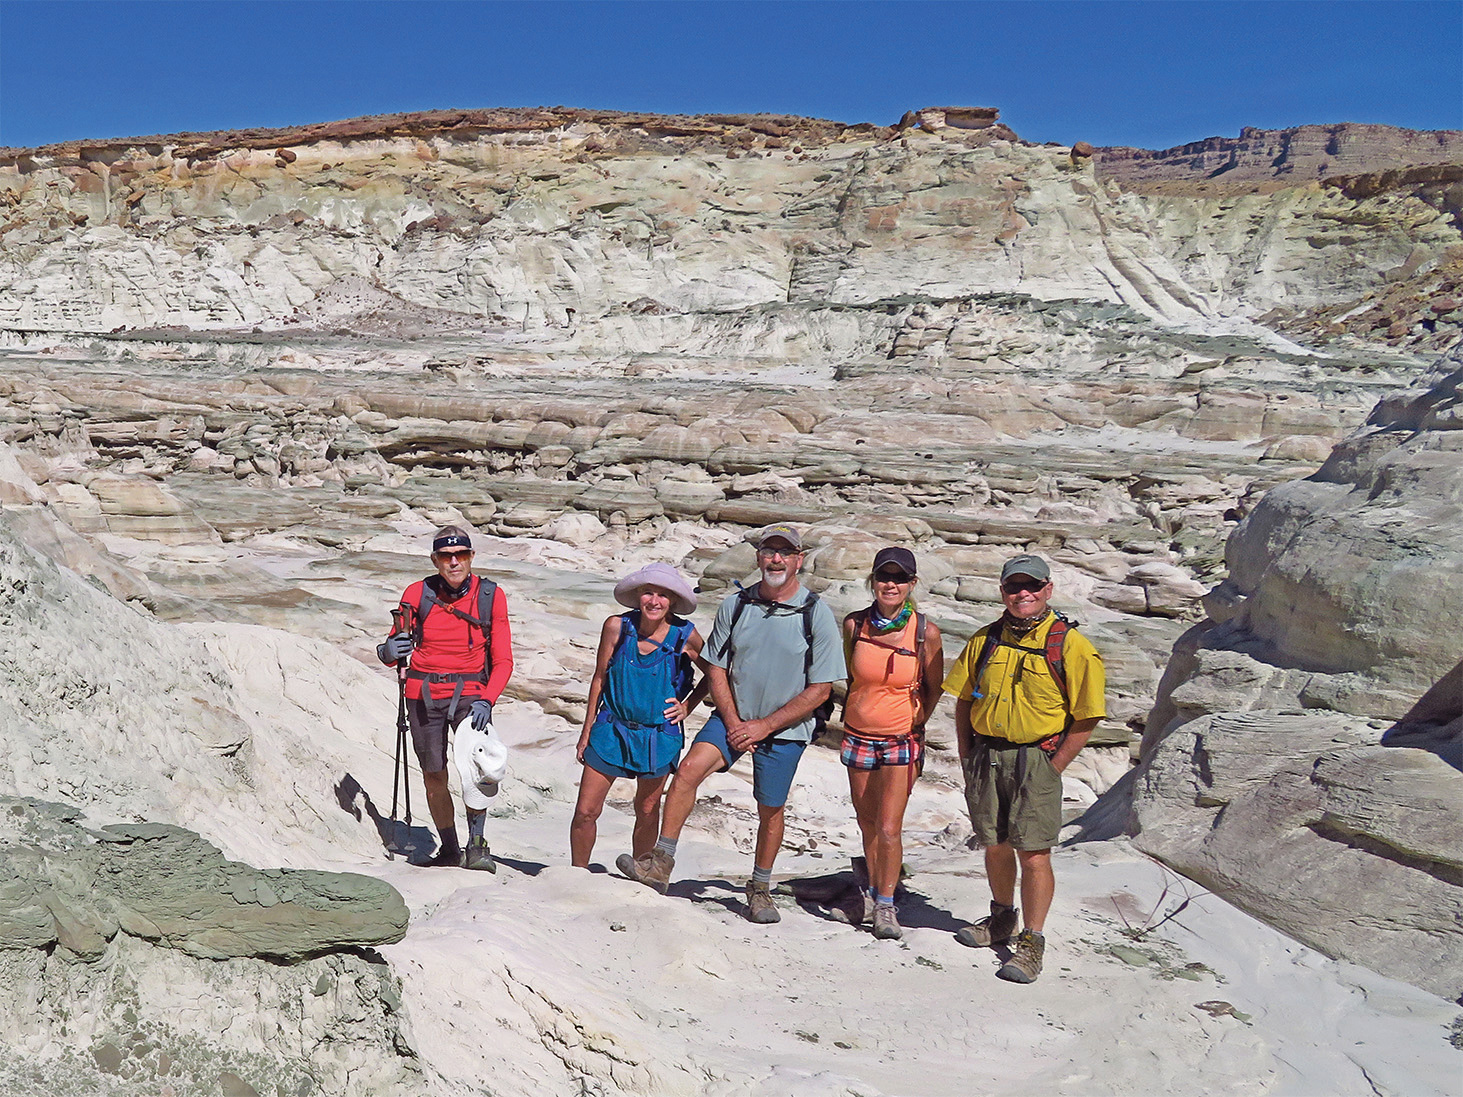 Left to right: Lynn Warren (photographer), Eileen and Leon Mosse, Kris Raczkiewicz, and Neal Wring enjoying a magical canyon with brilliant white rock formations in southern Utah.